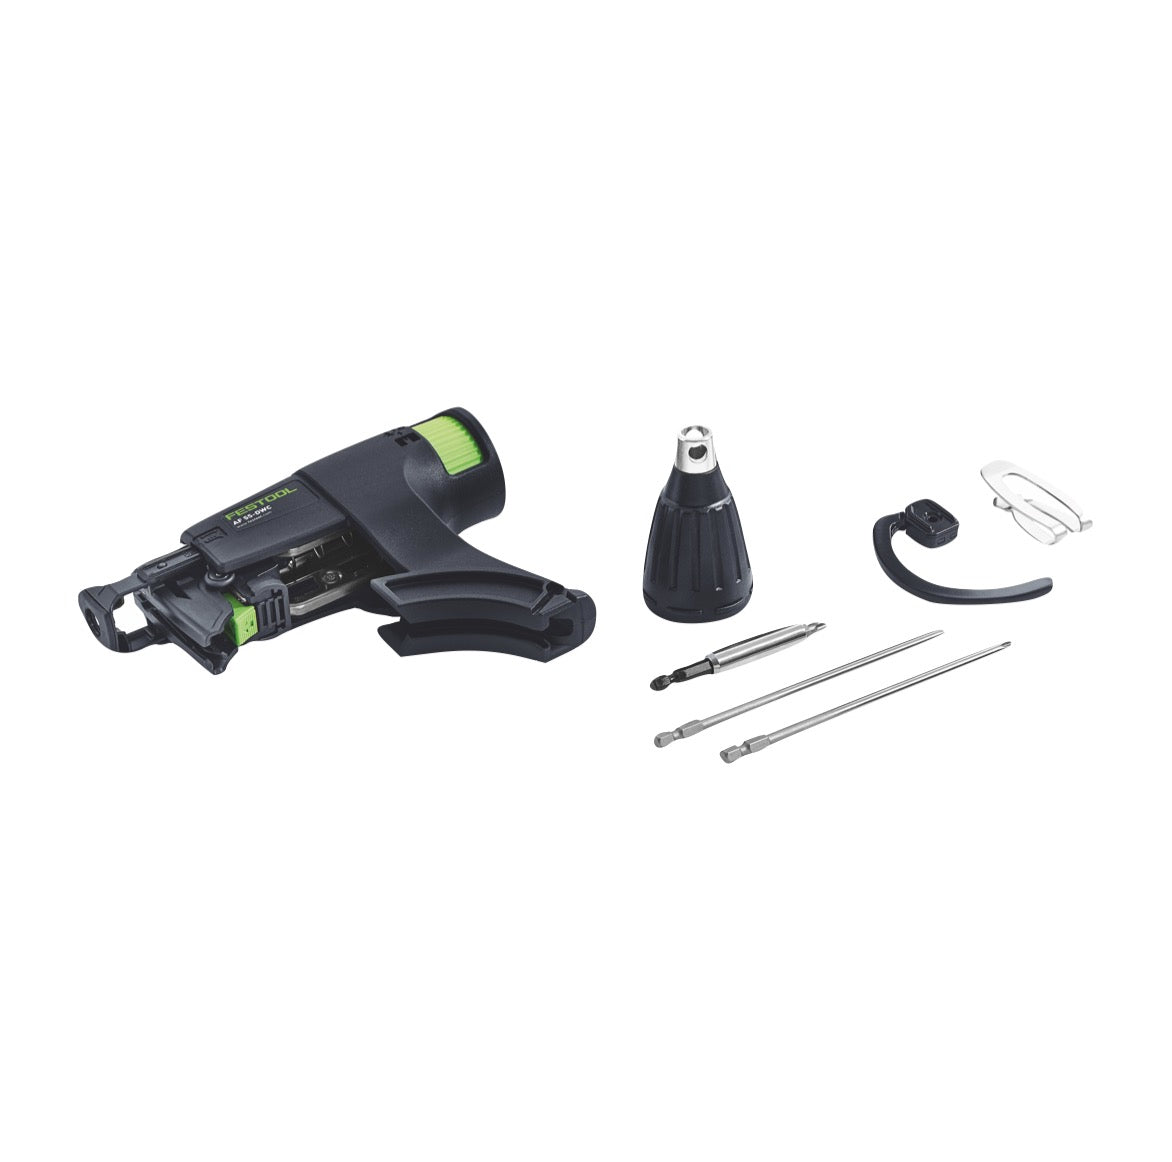 Festool DURADRIVE DWC 18-4500 Basic Akku Bauschrauber 18 V 14 Nm Brushless ( 576504 ) + Systainer + Systainer ToolBox SYS3 TB M 137